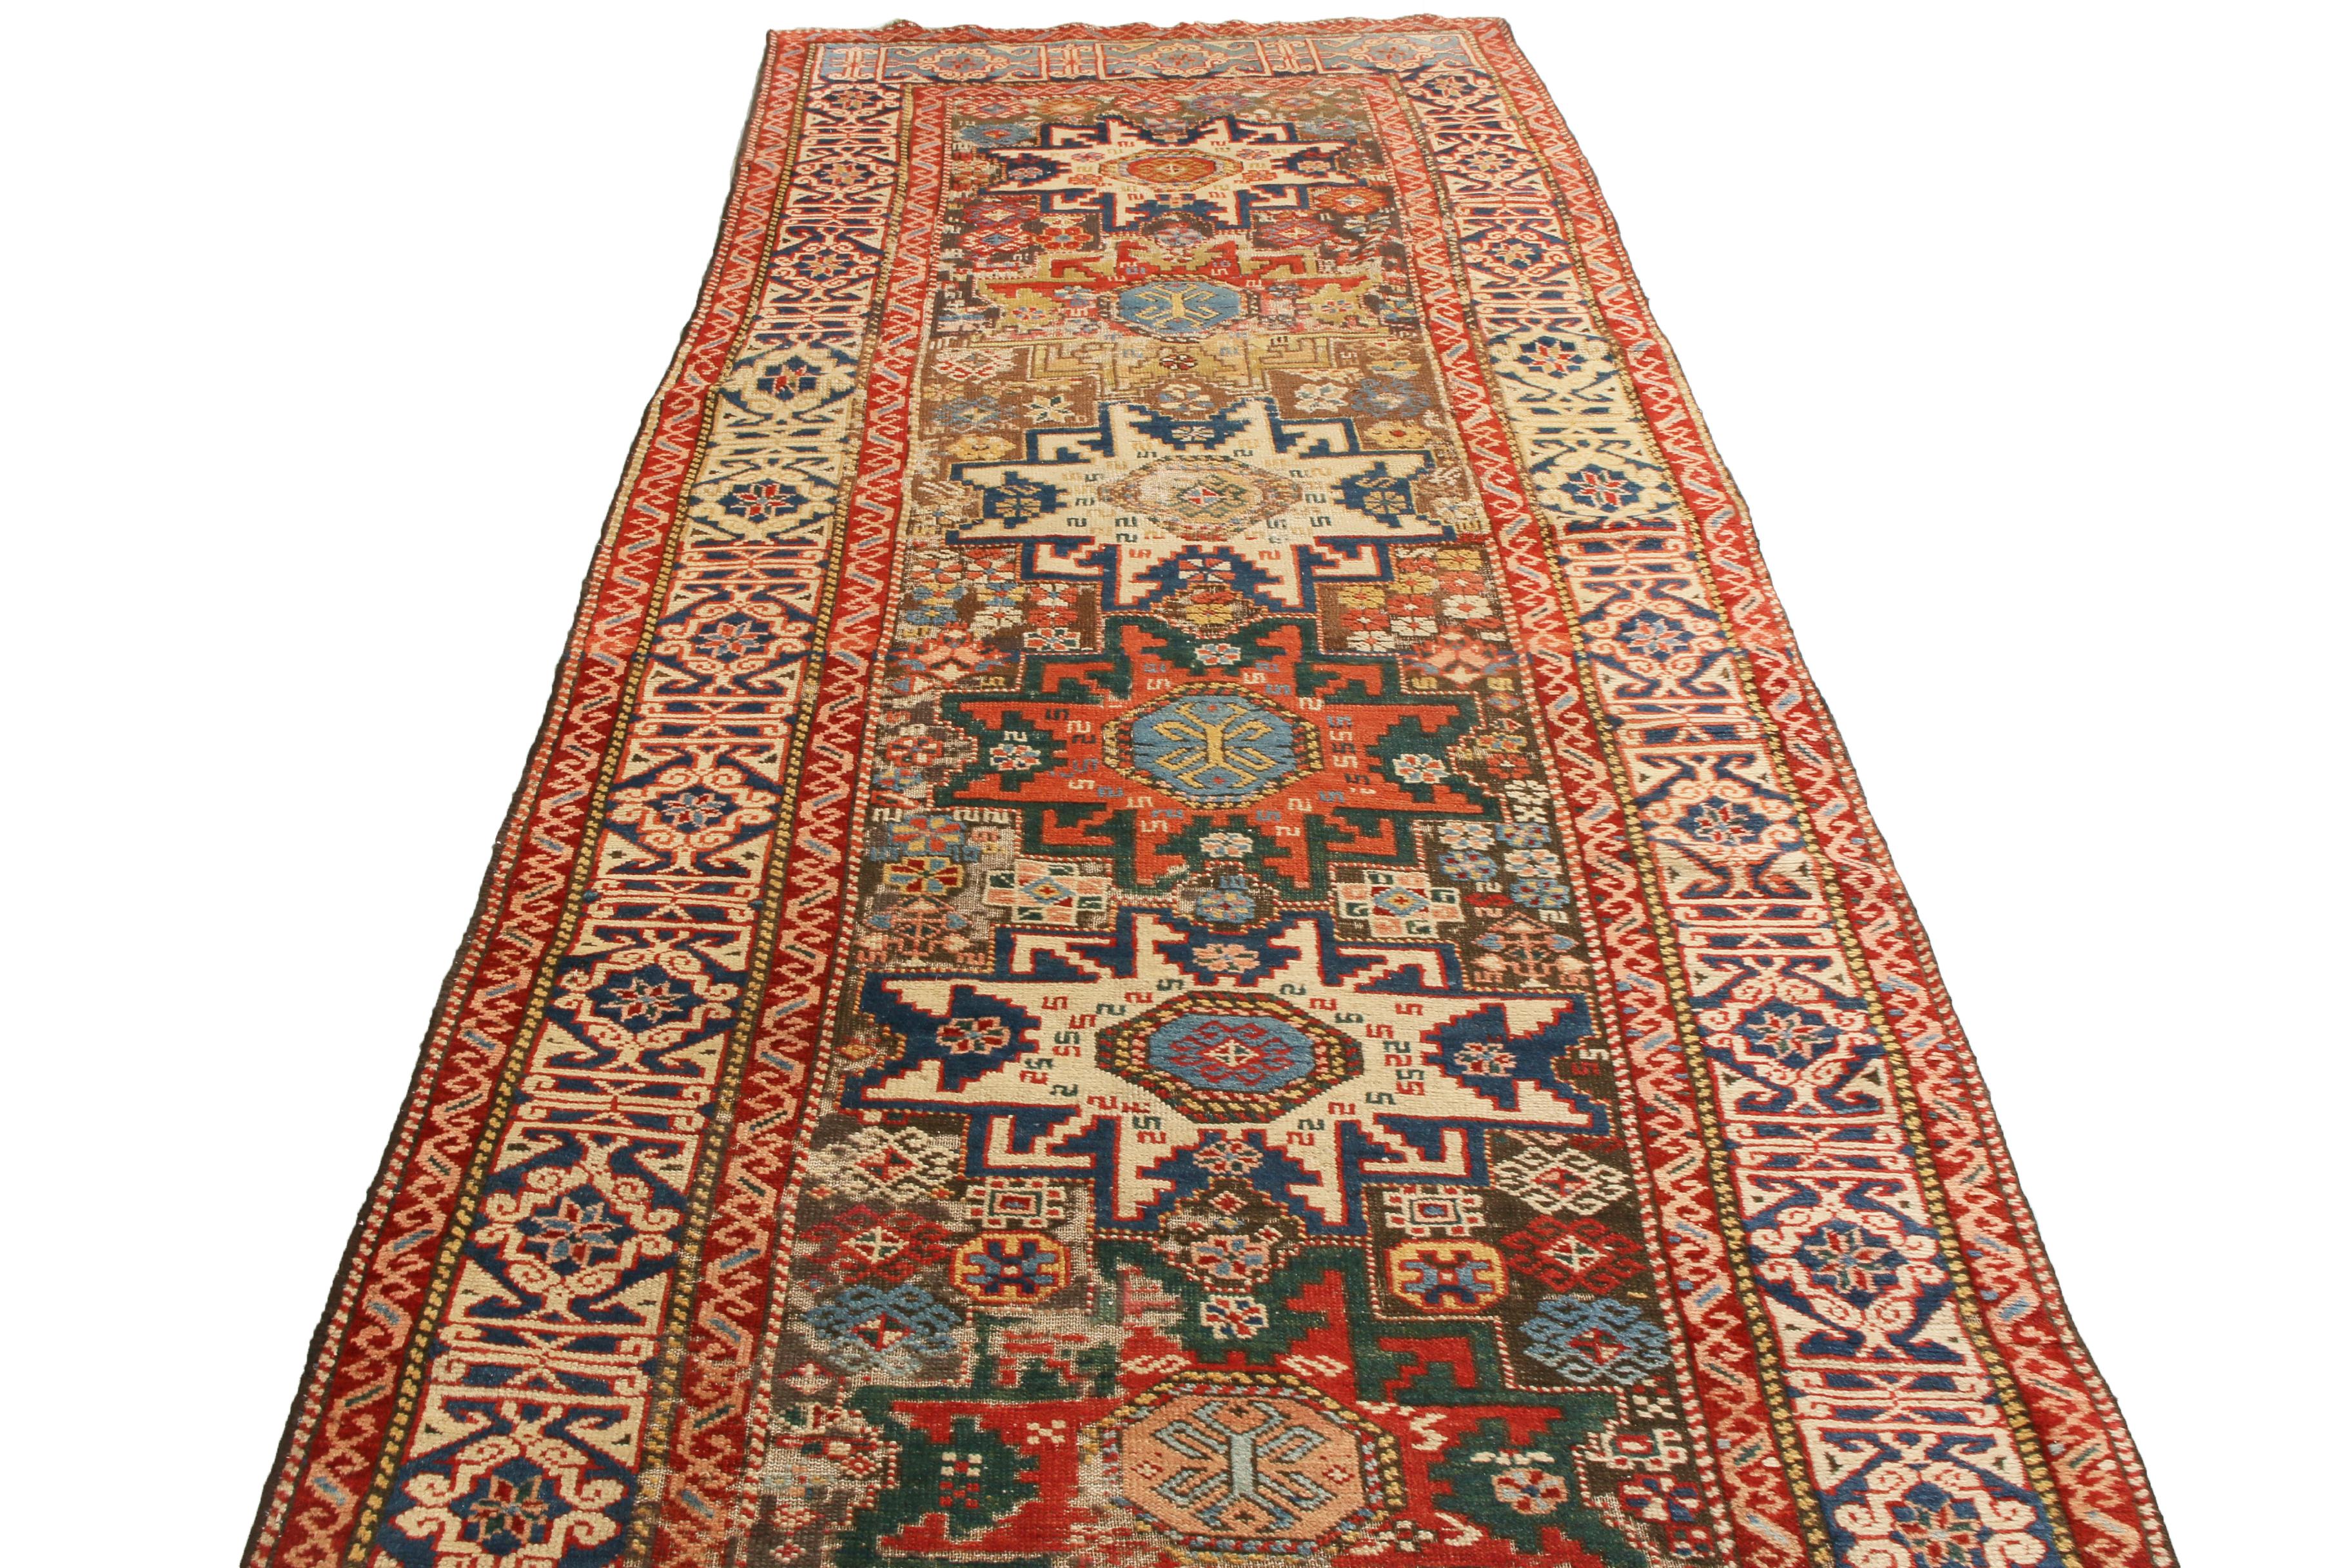 Originating from Russia in 1900, this antique geometric runner depicts a lightly distressed Lori design, complemented by a series of eight-pointed star, hook, and quarter-diamond Gul motifs. Hand knotted in high quality wool, the mirrored hooking